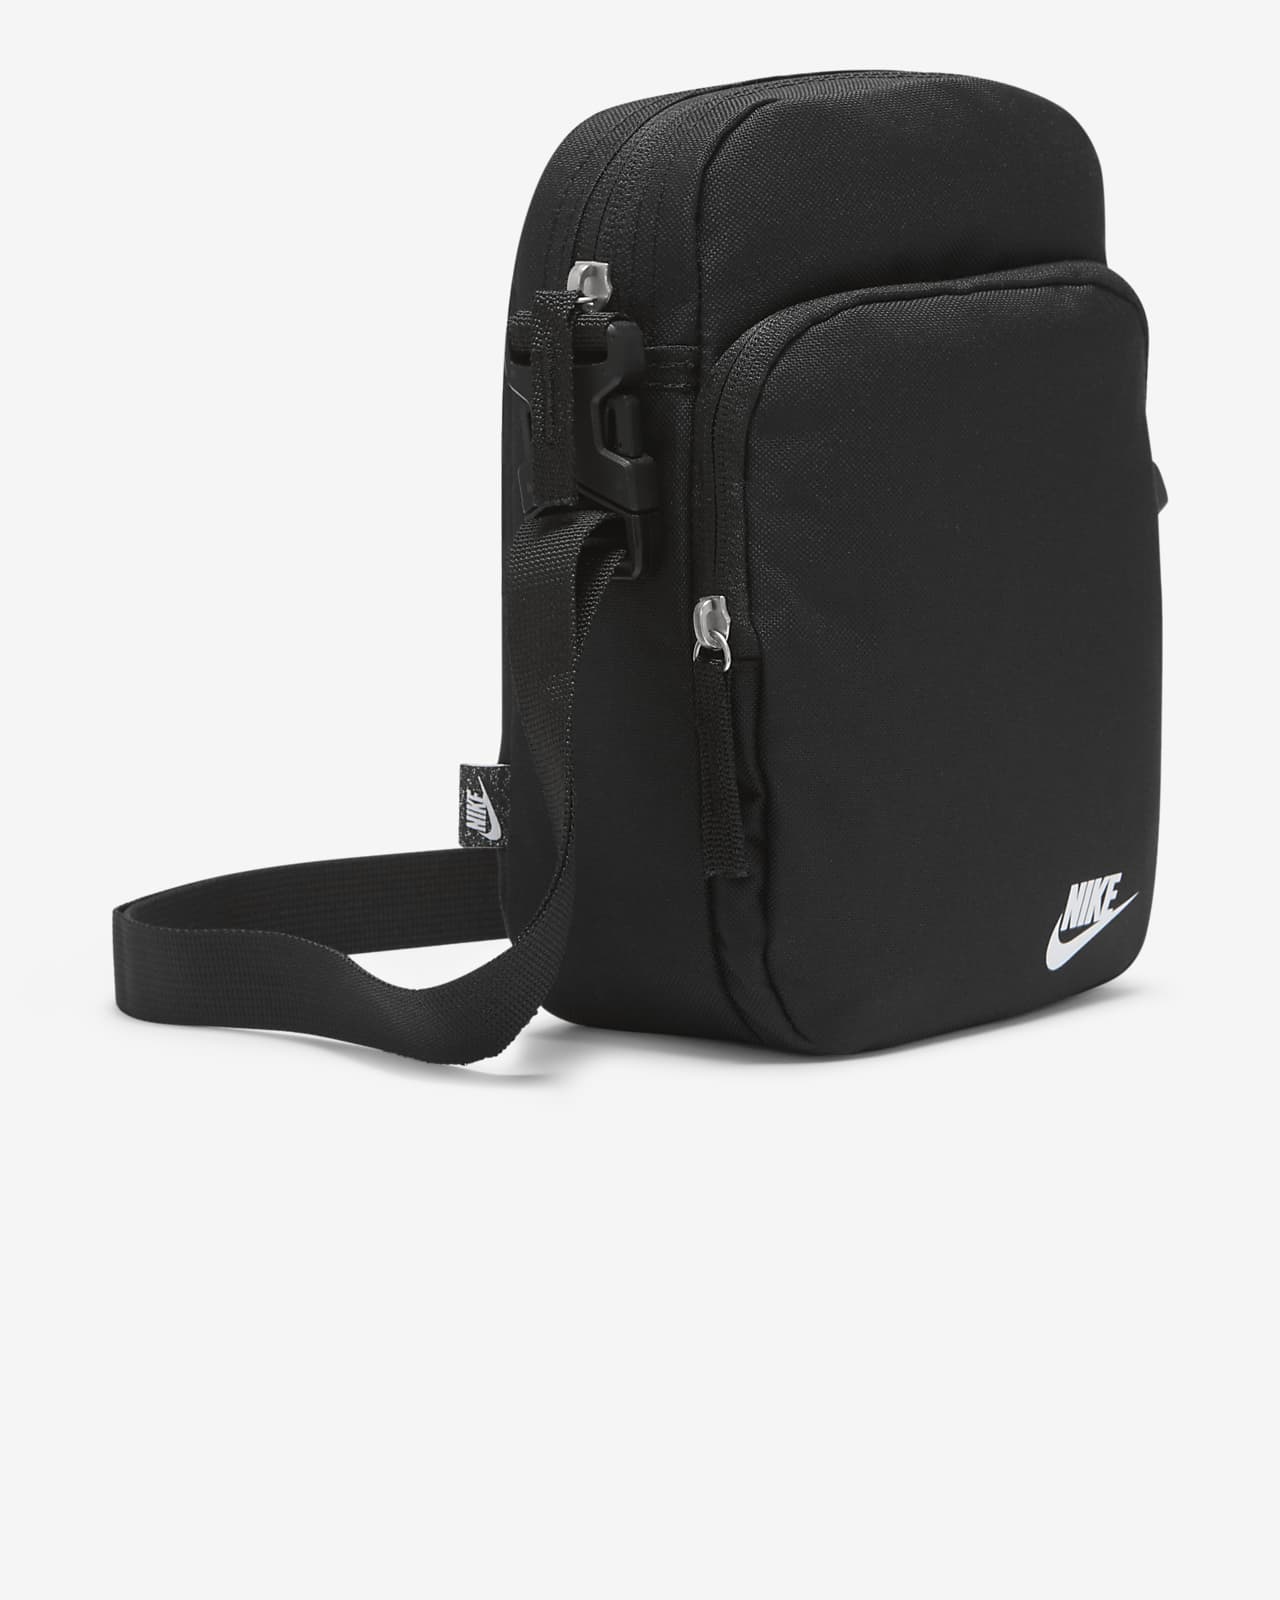 Magnetic industry purely black nike cross body bag will do position bite